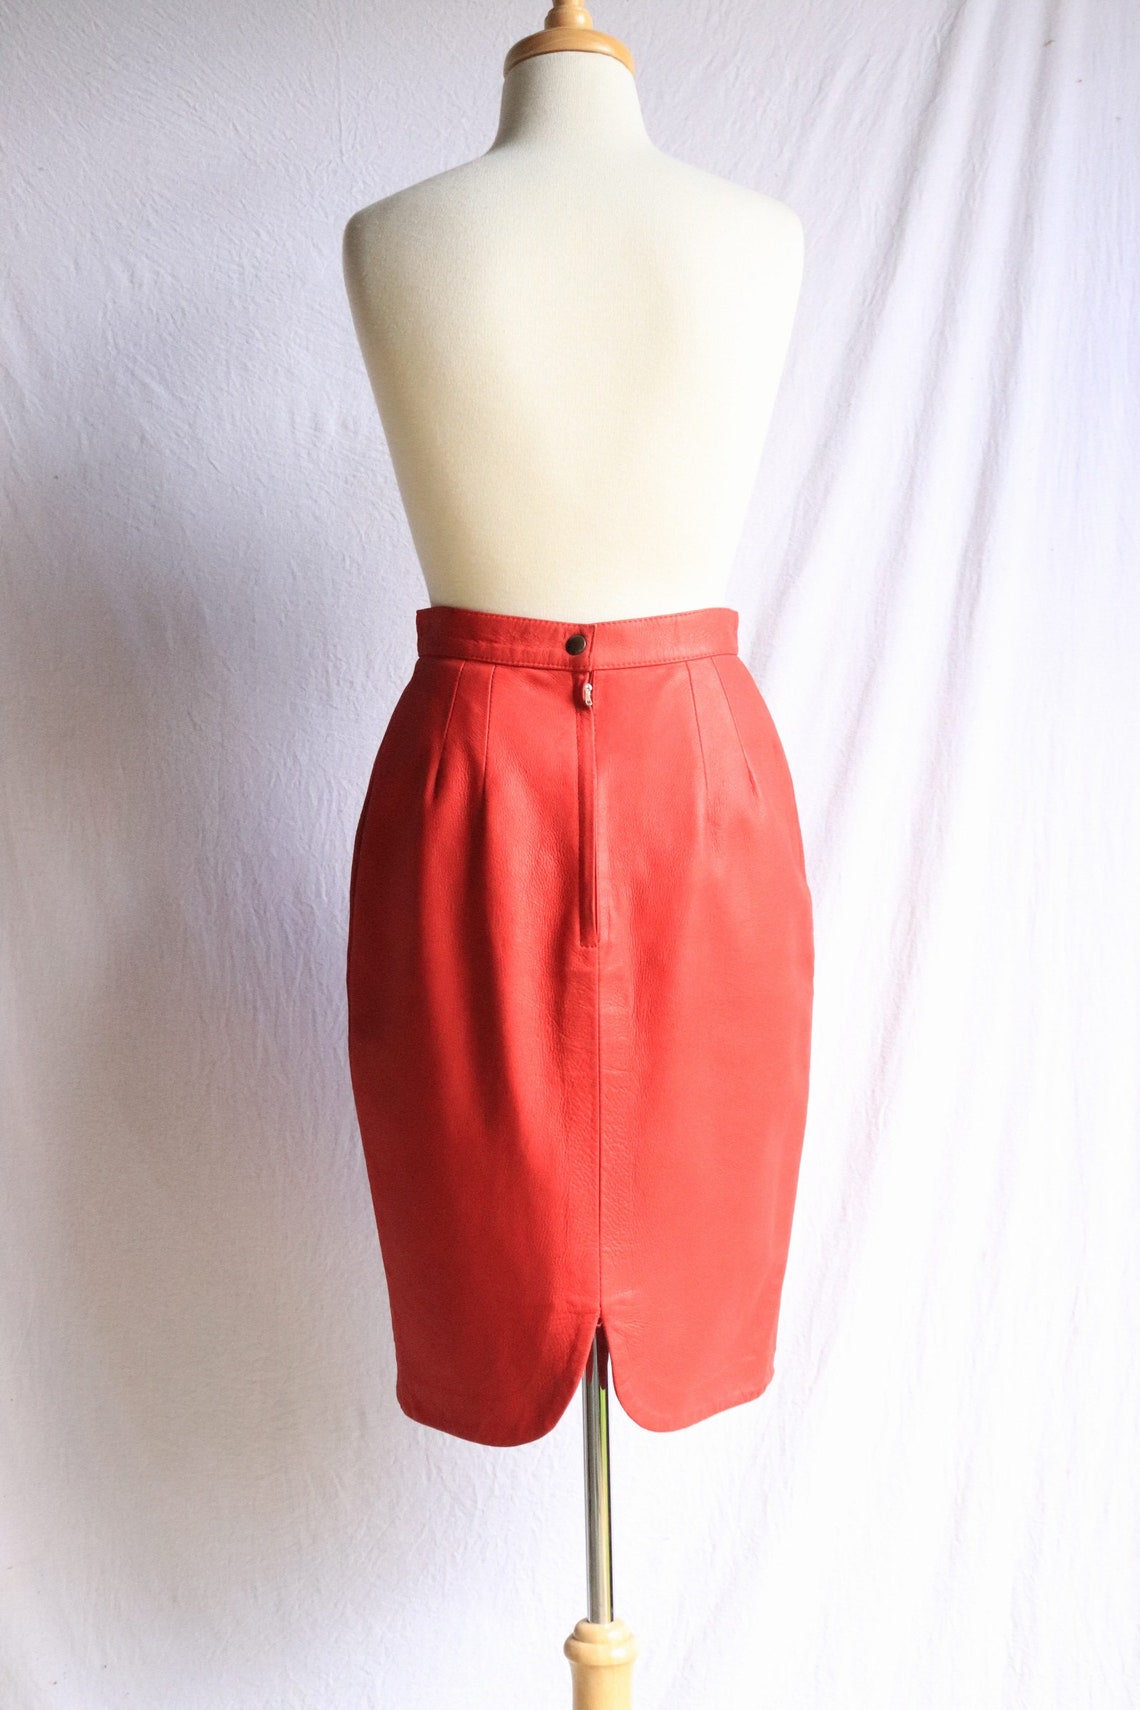 80s red leather pencil skirt knee length vintage size 8 | Etsy